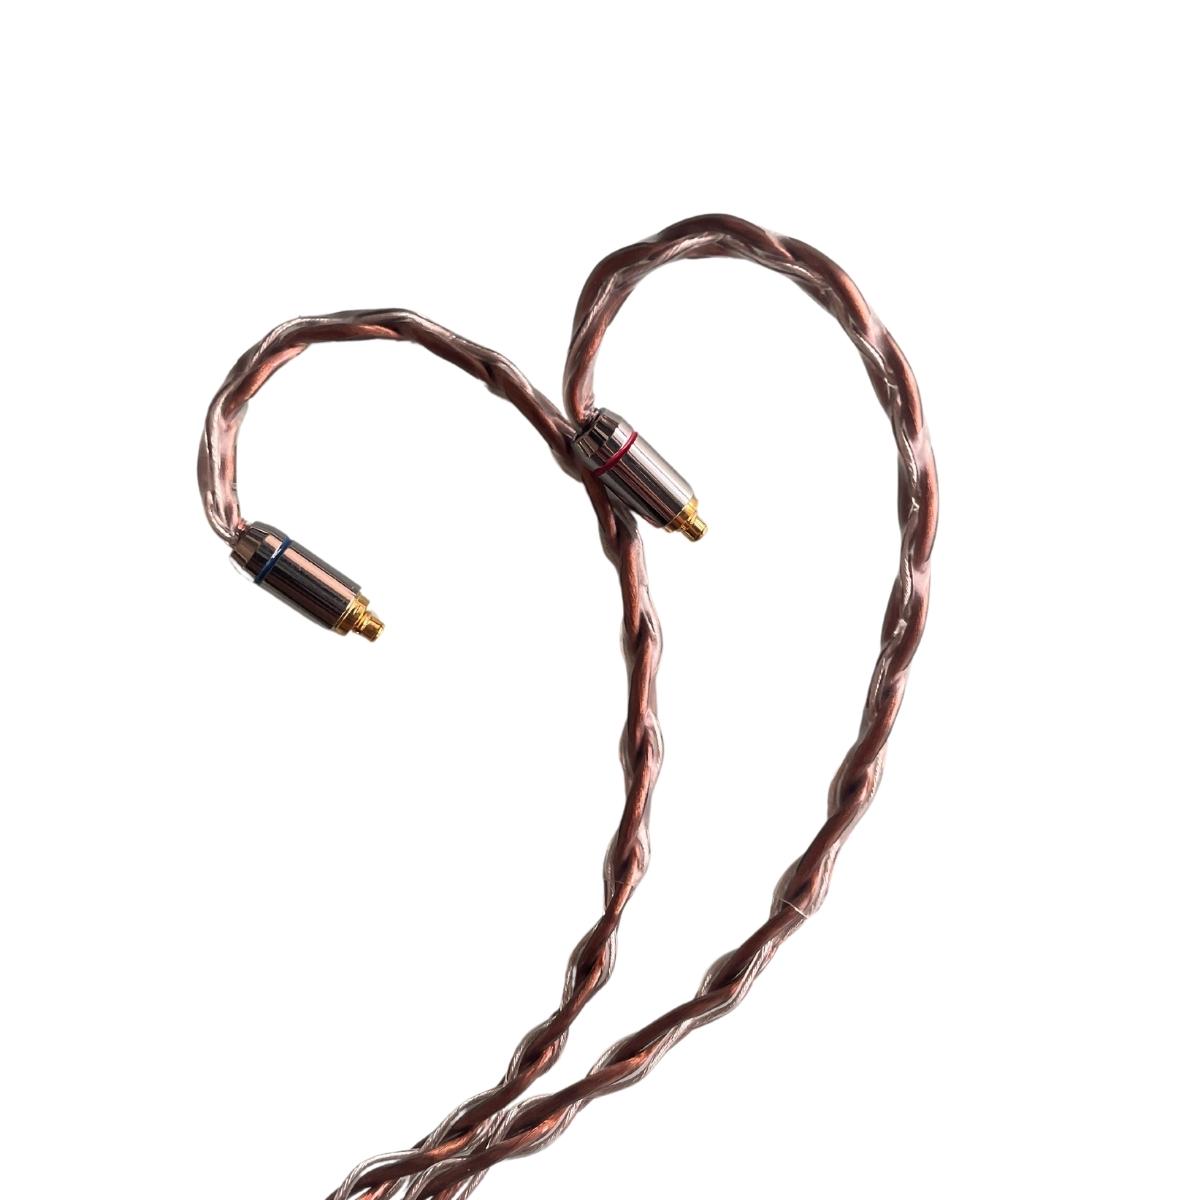 XINHS 8 Core Cable With Mic For Sennheiser IE300/IE600/IE900